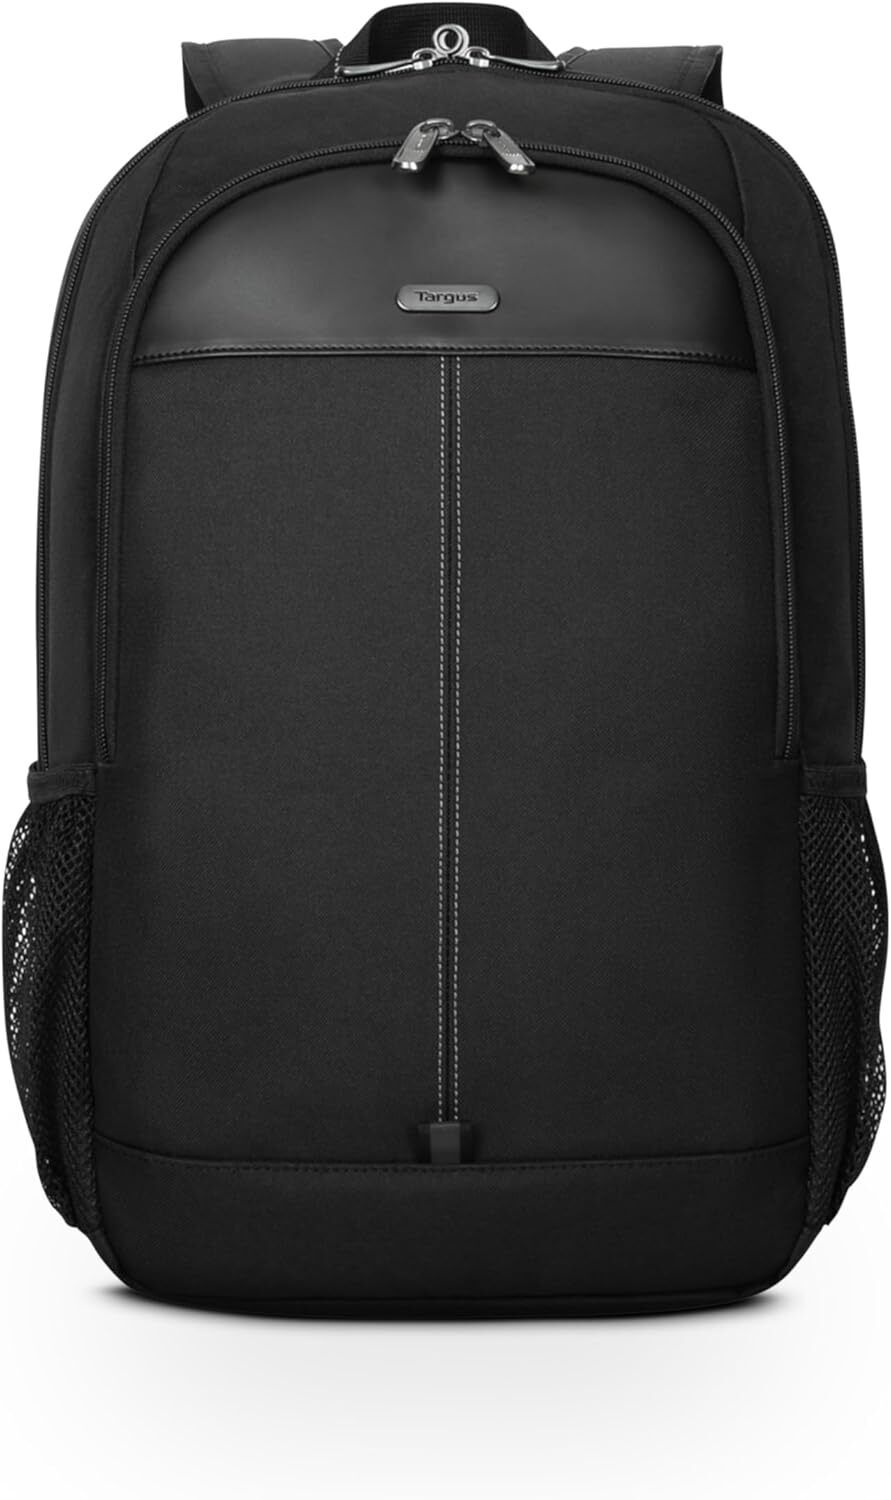 Targus 15-16 Inch Classic Laptop Backpack - Fits Most Laptops up to 16